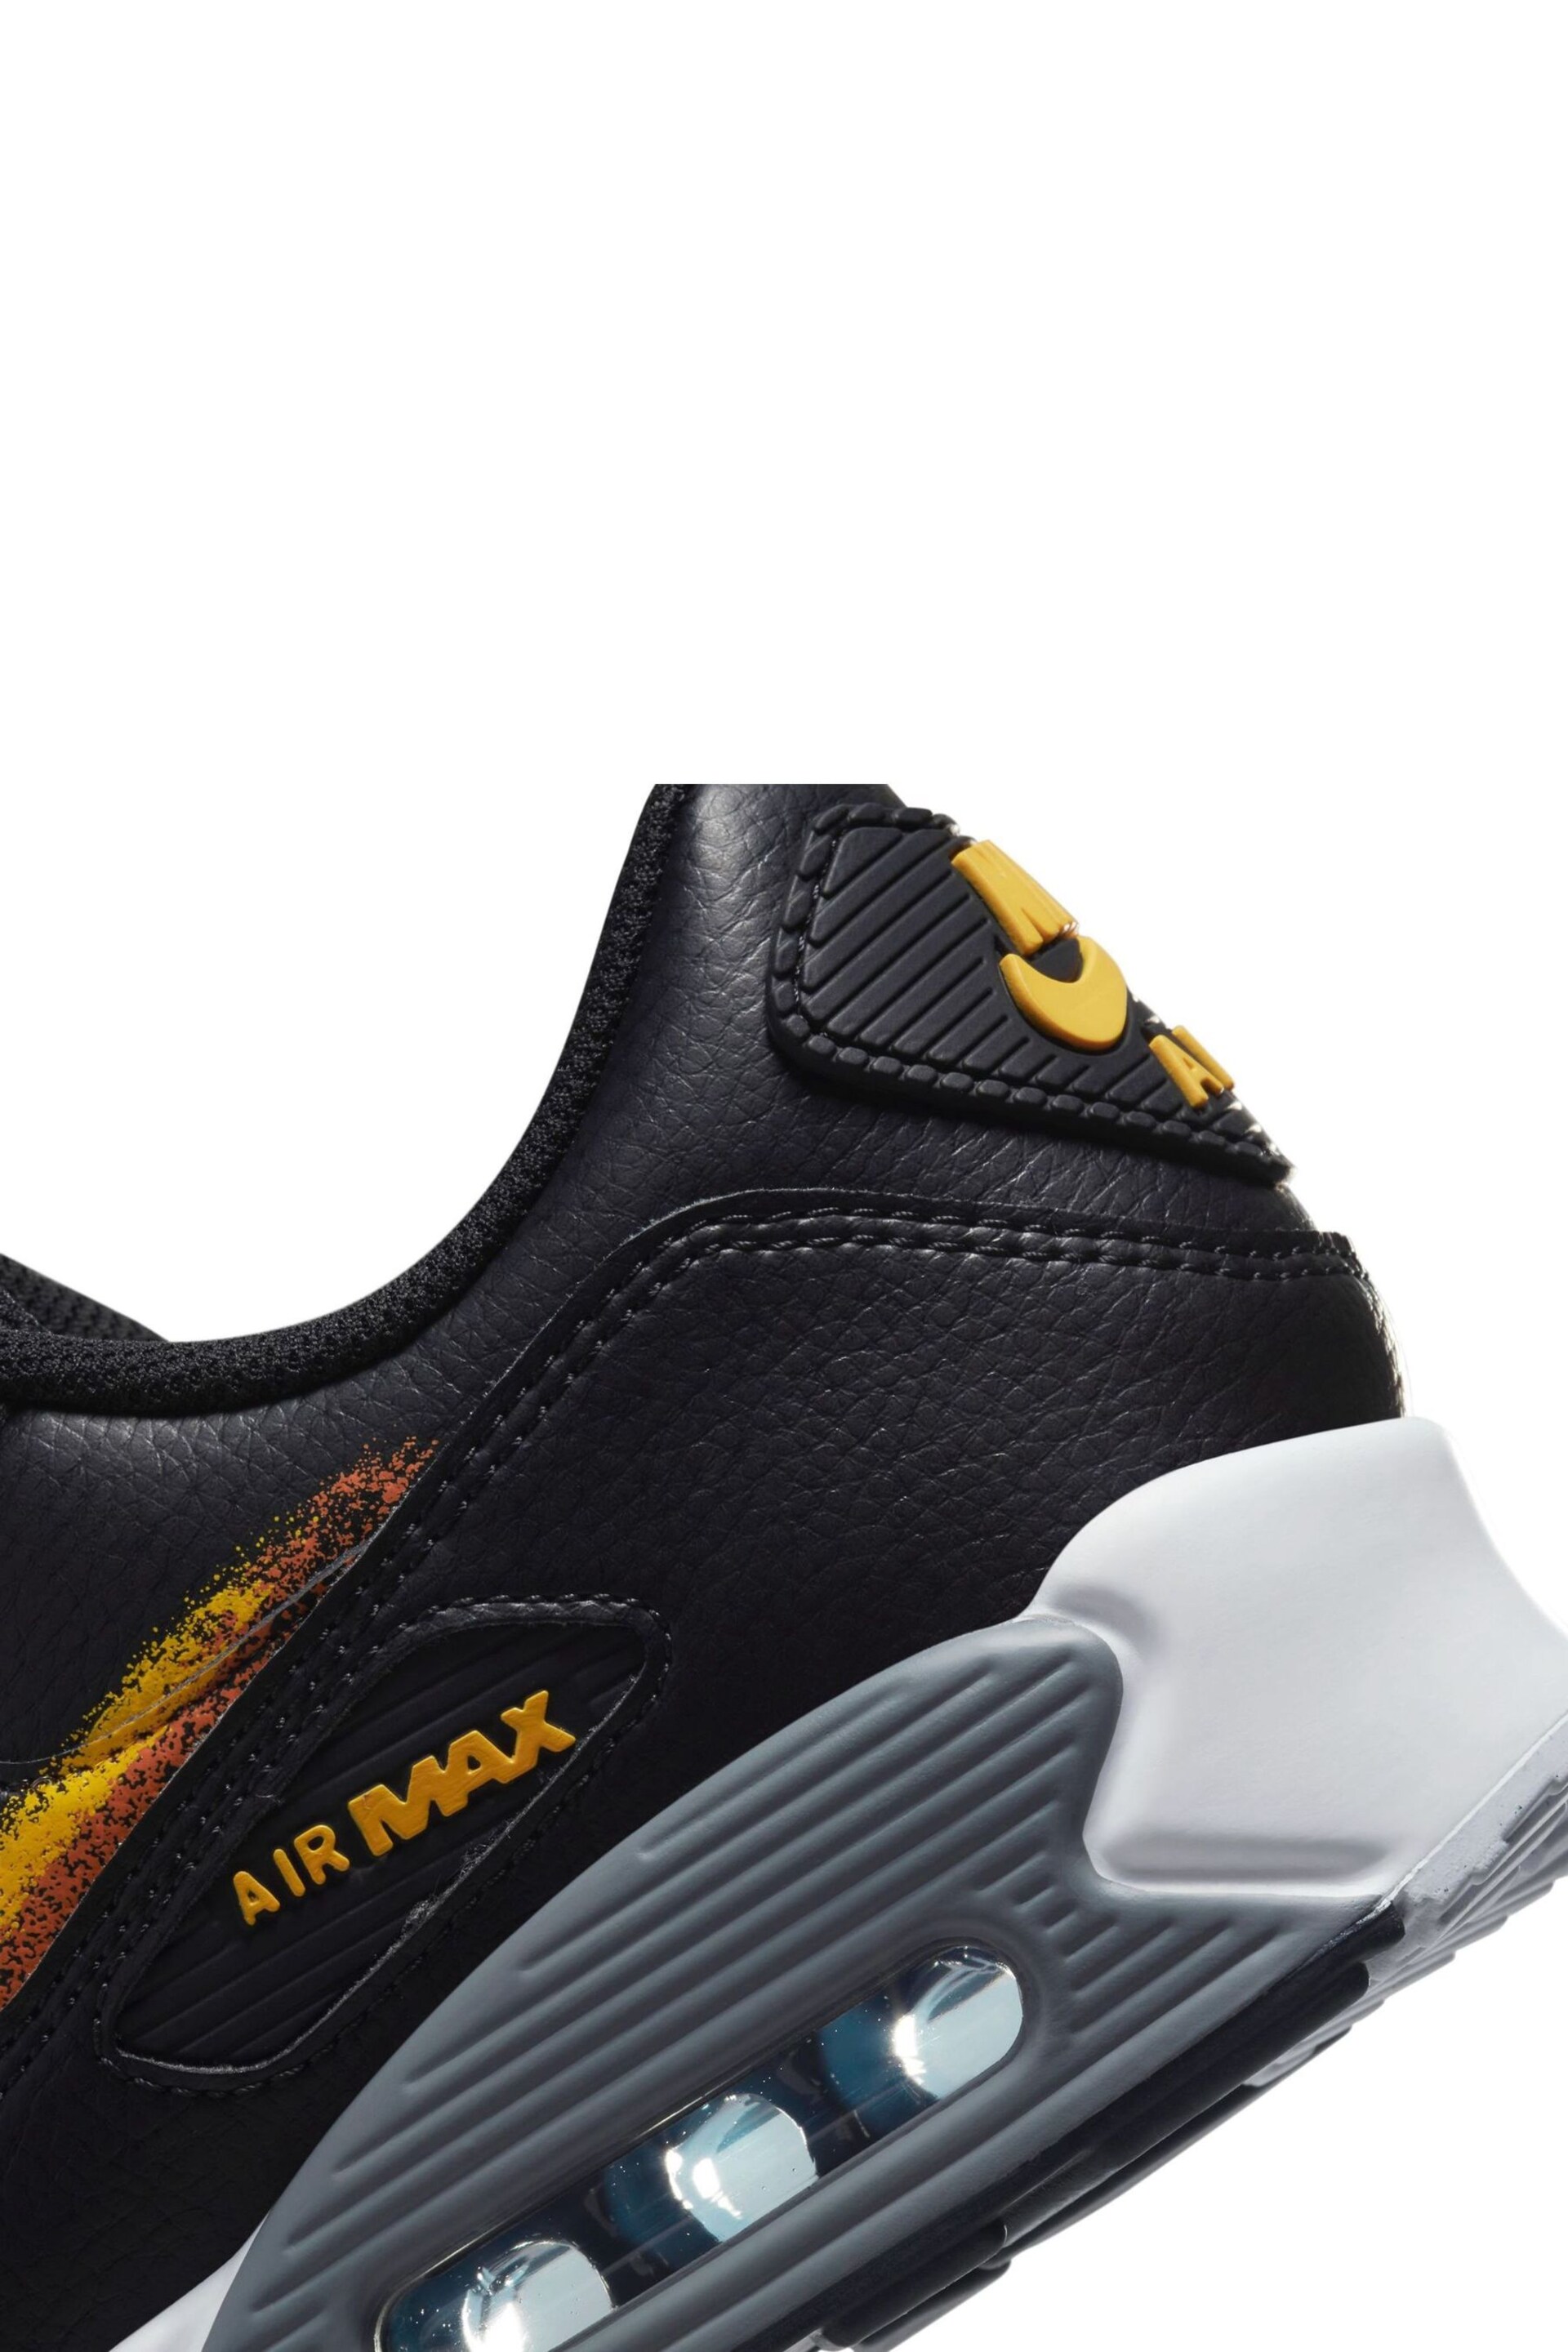 Nike Black/Gold Air Max 90 Trainers - Image 8 of 10